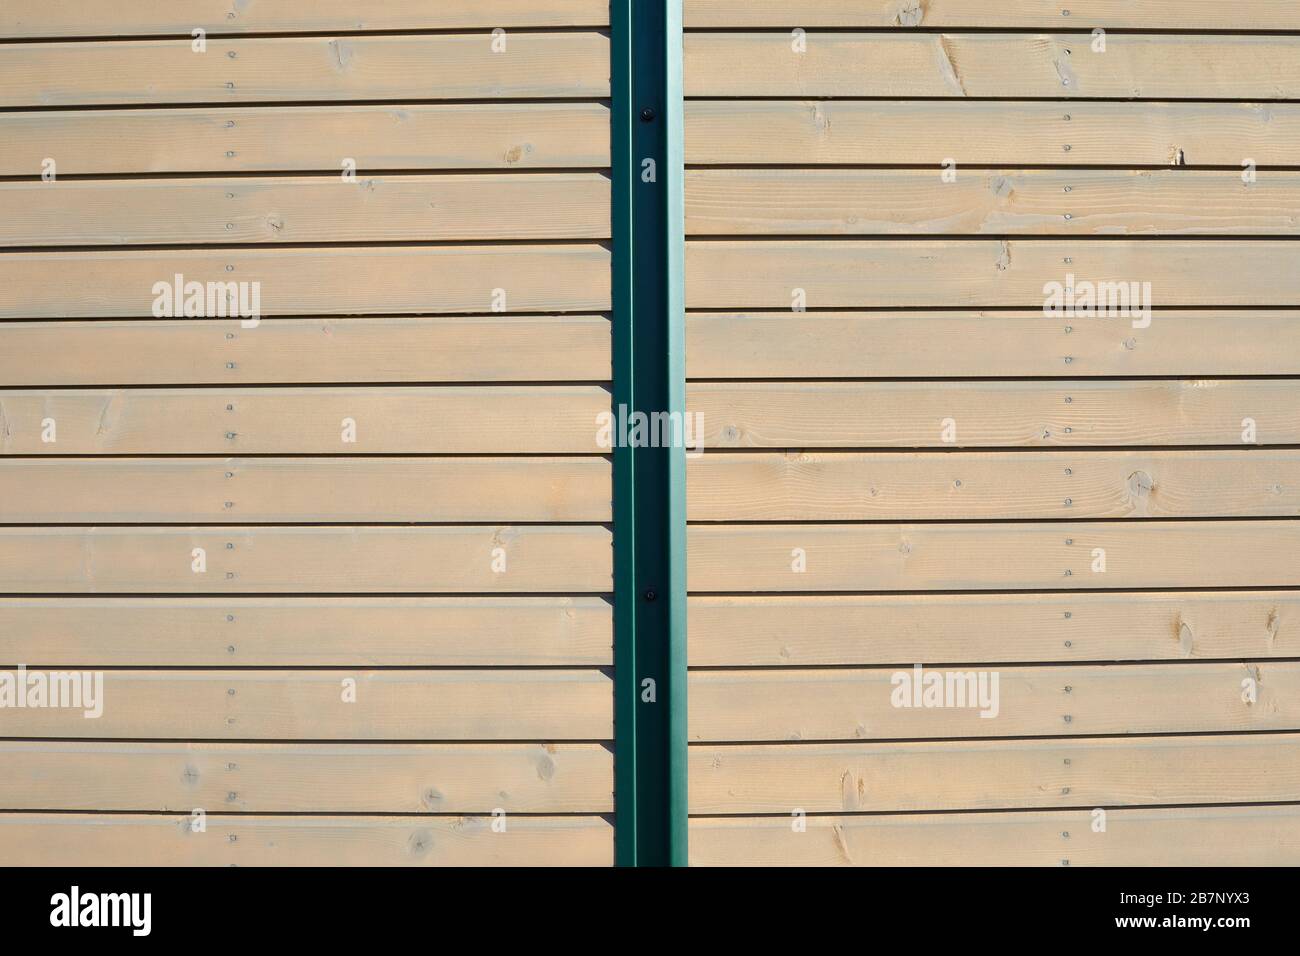 Wooden texture background with planks and green metal bar in sunlight Stock Photo